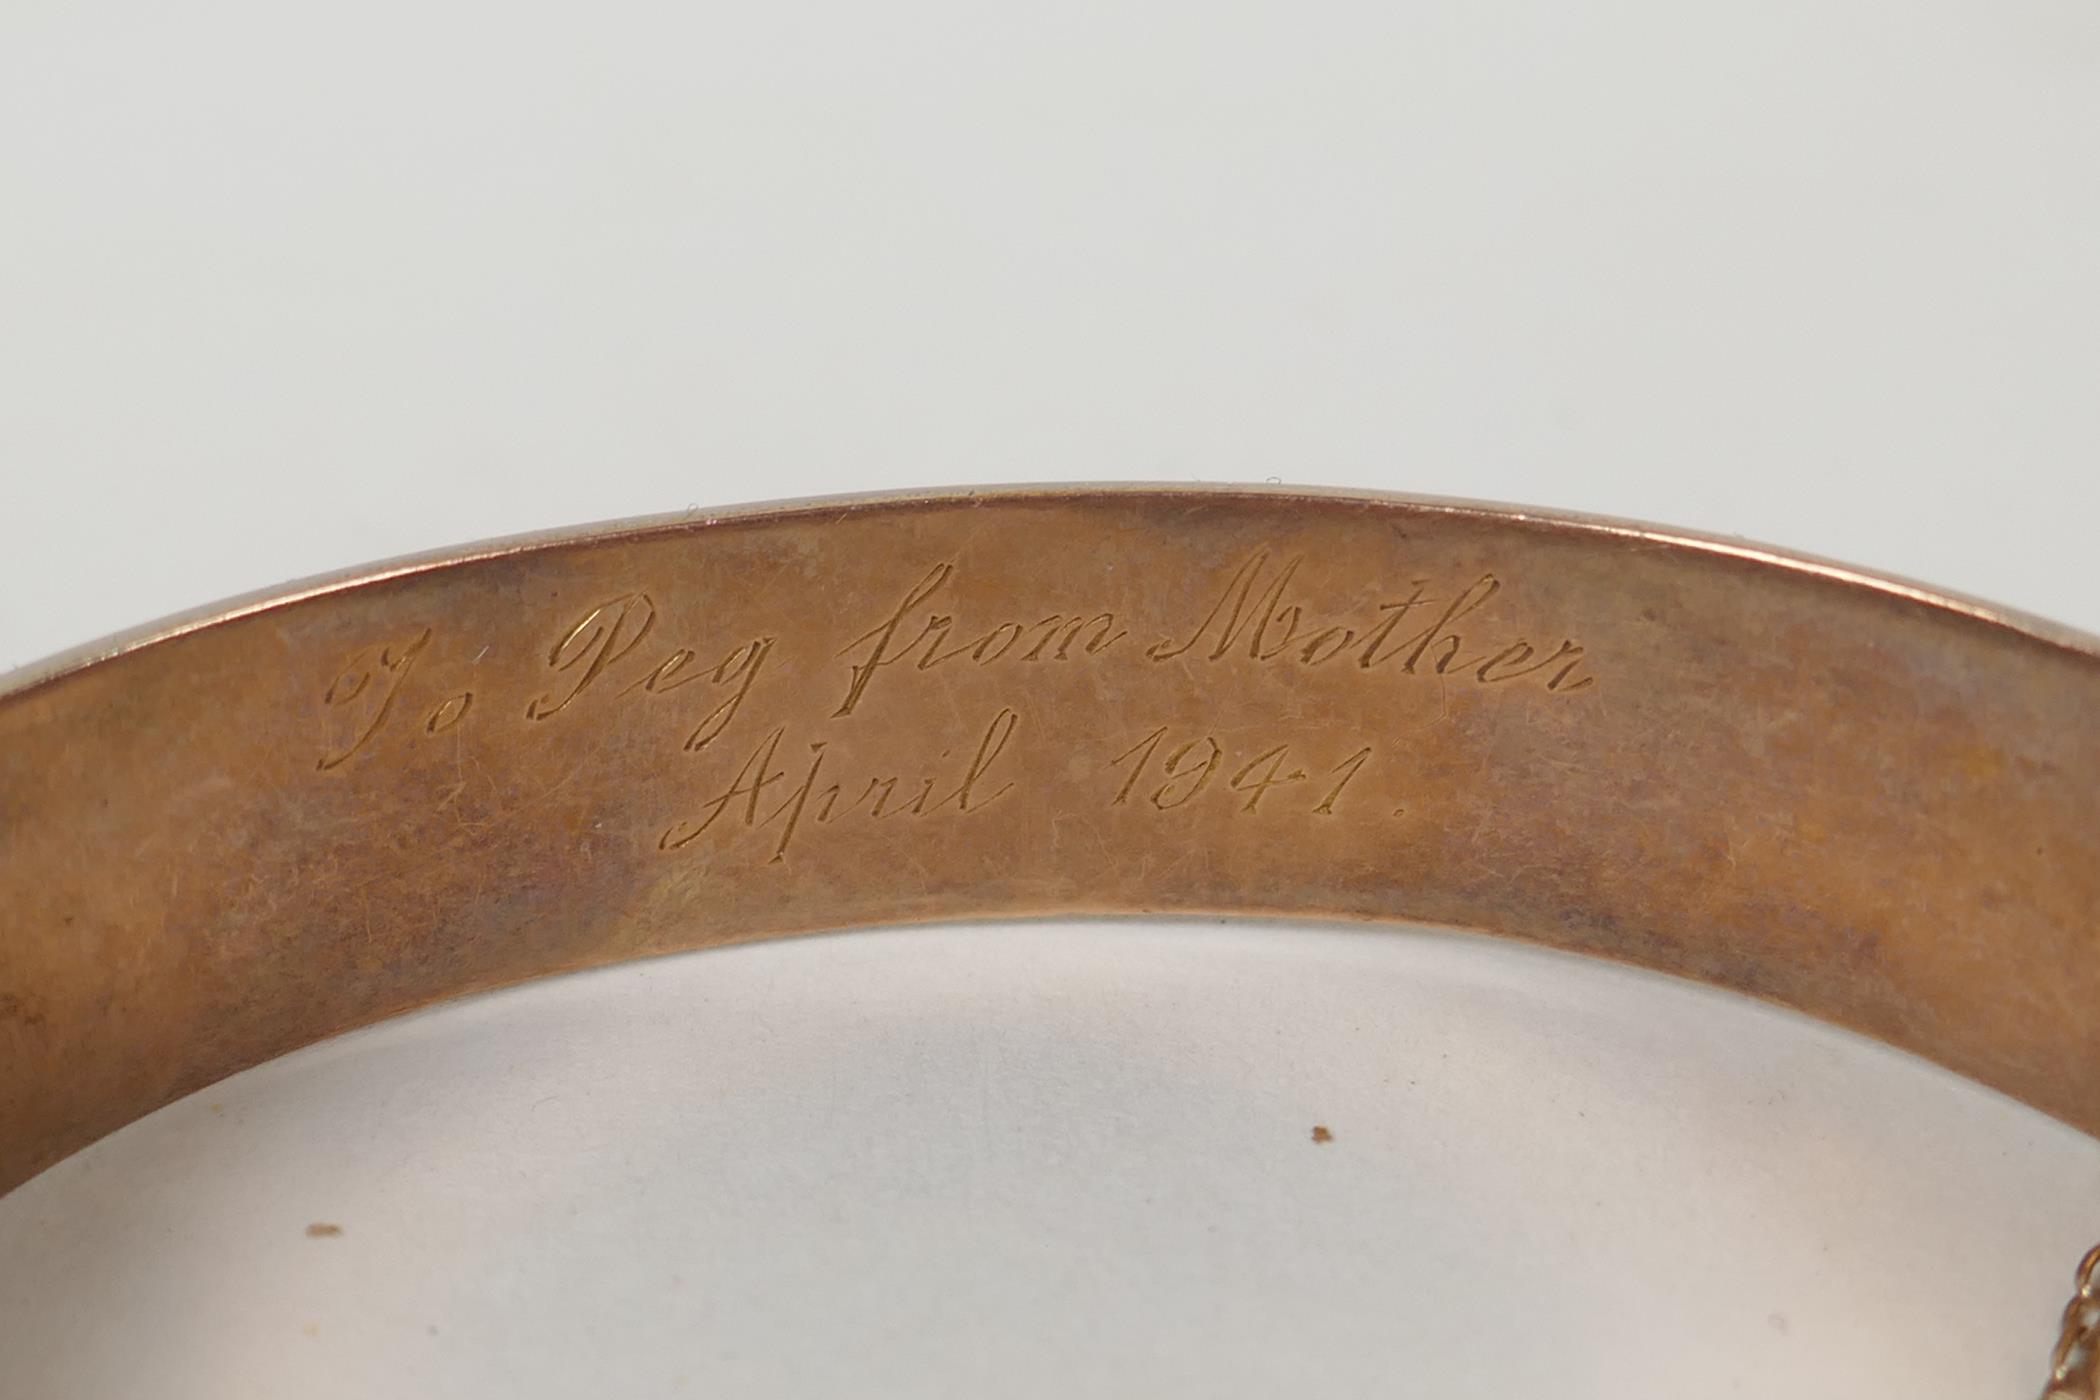 A 9ct gold bangle with scrolling decoration and inscription, 6 x 5.5cm, 14.9g - Image 2 of 3